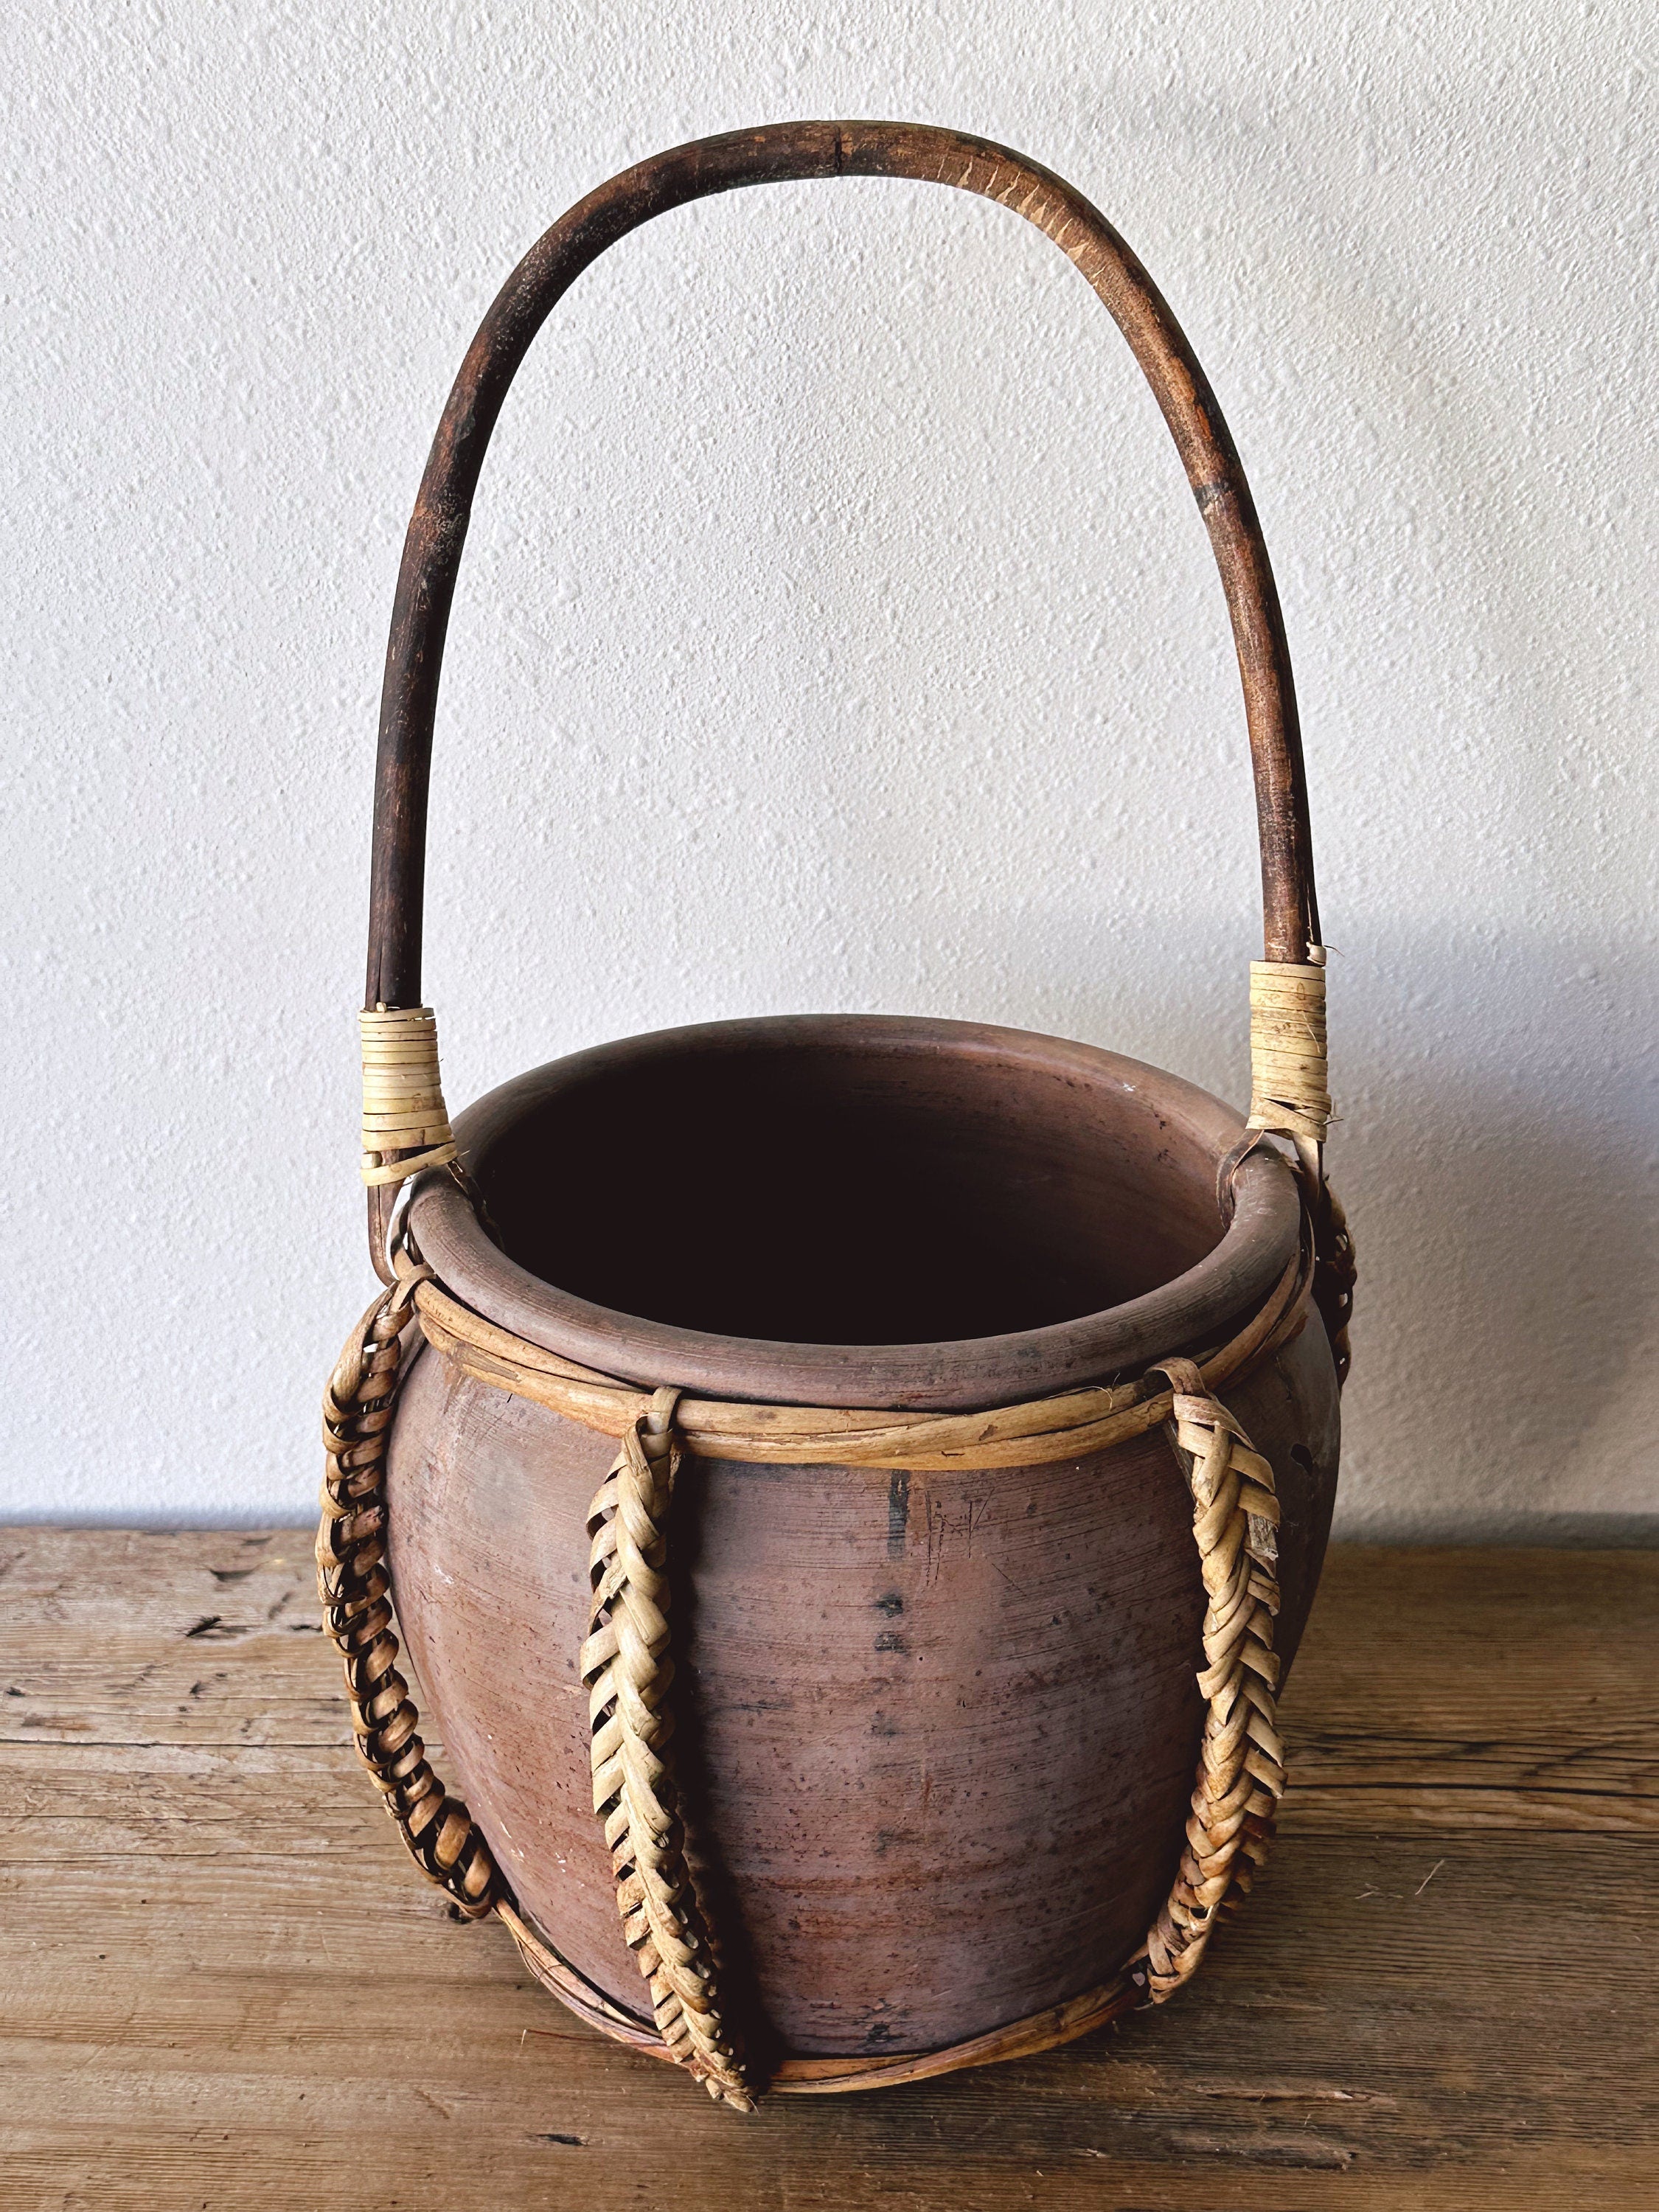 Vintage Hand Made Folk Art Pottery Basket with Handle | Rustic Southwestern Style Home Decor Clay Vase with Weaved Straw | Table Centerpiece